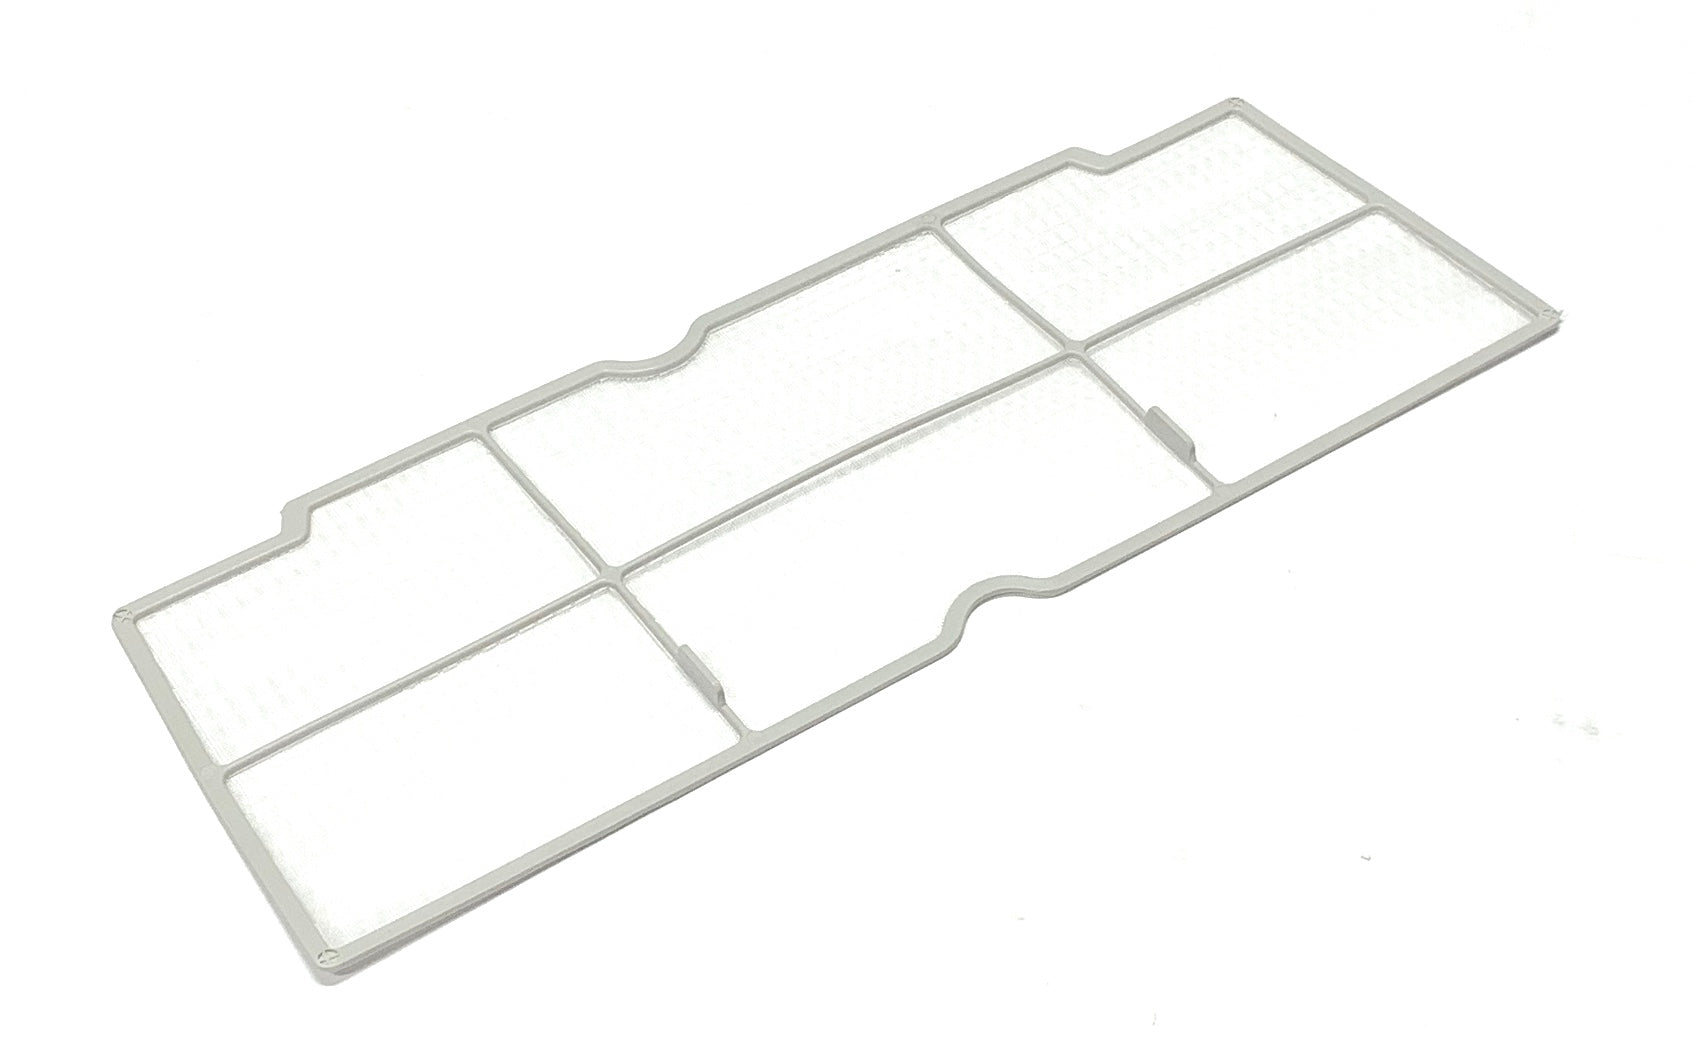 OEM Electrolux Air Conditioner AC Filter Originally Shipped With FFRE06L3S11, FFRA08L2S10